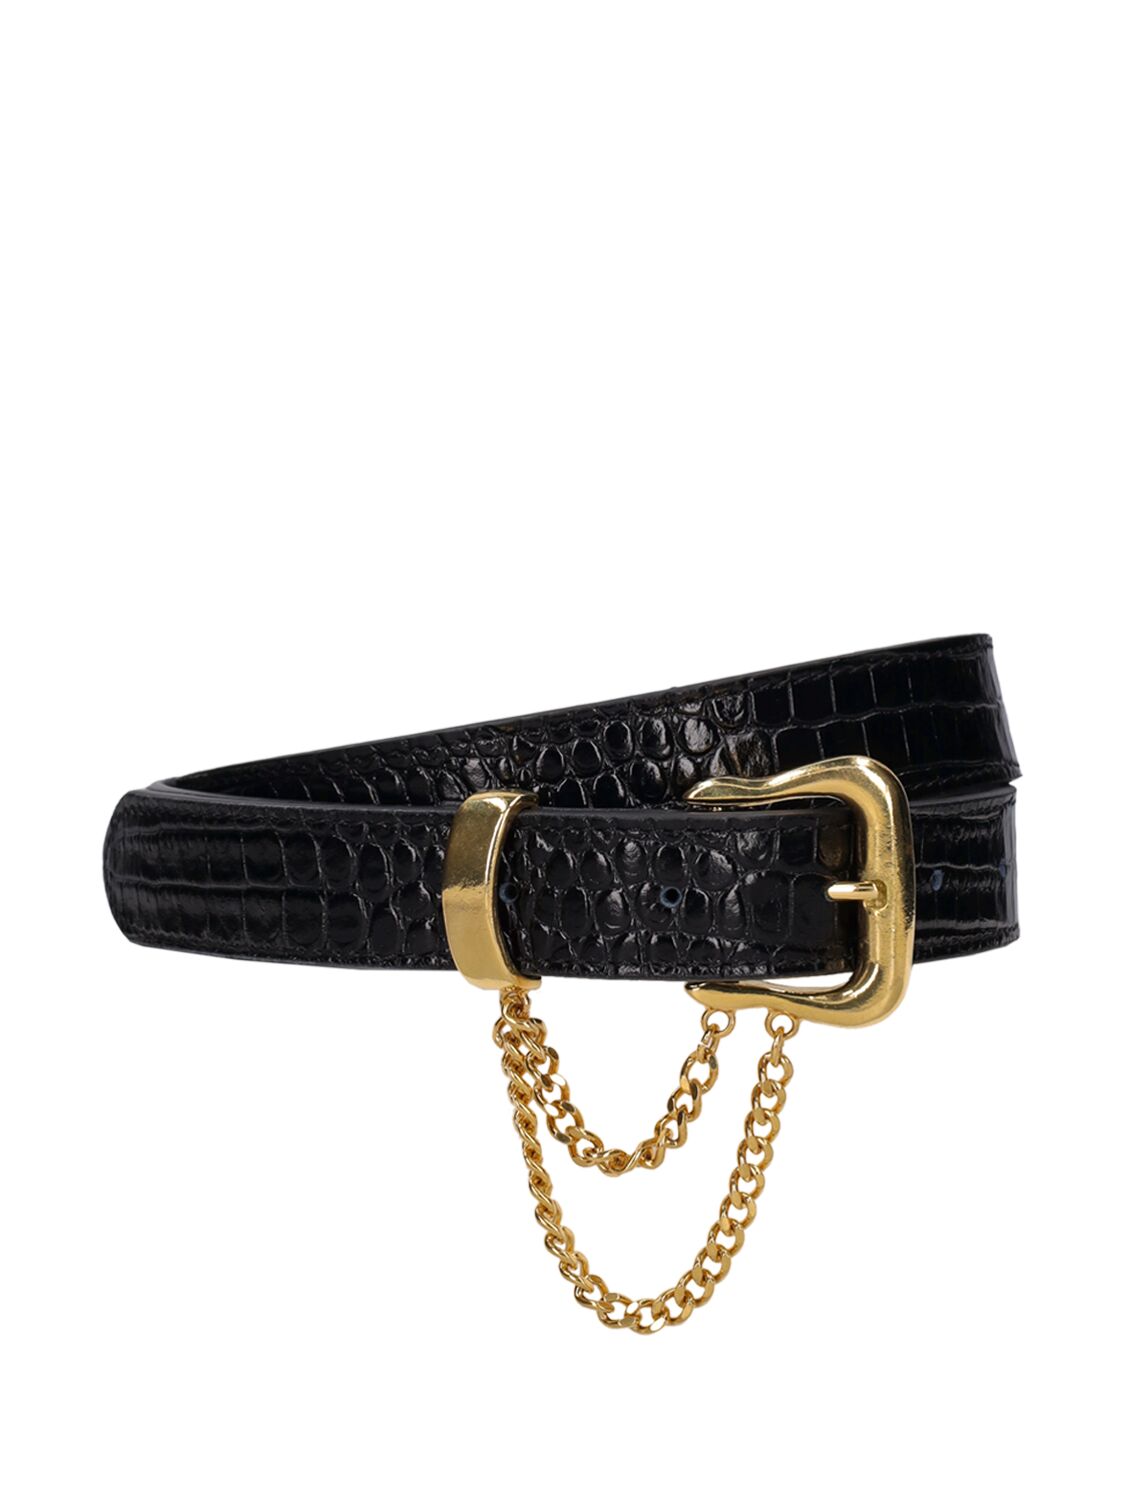 Alessandra Rich Embossed Leather Belt W/ Chain In Black,gold